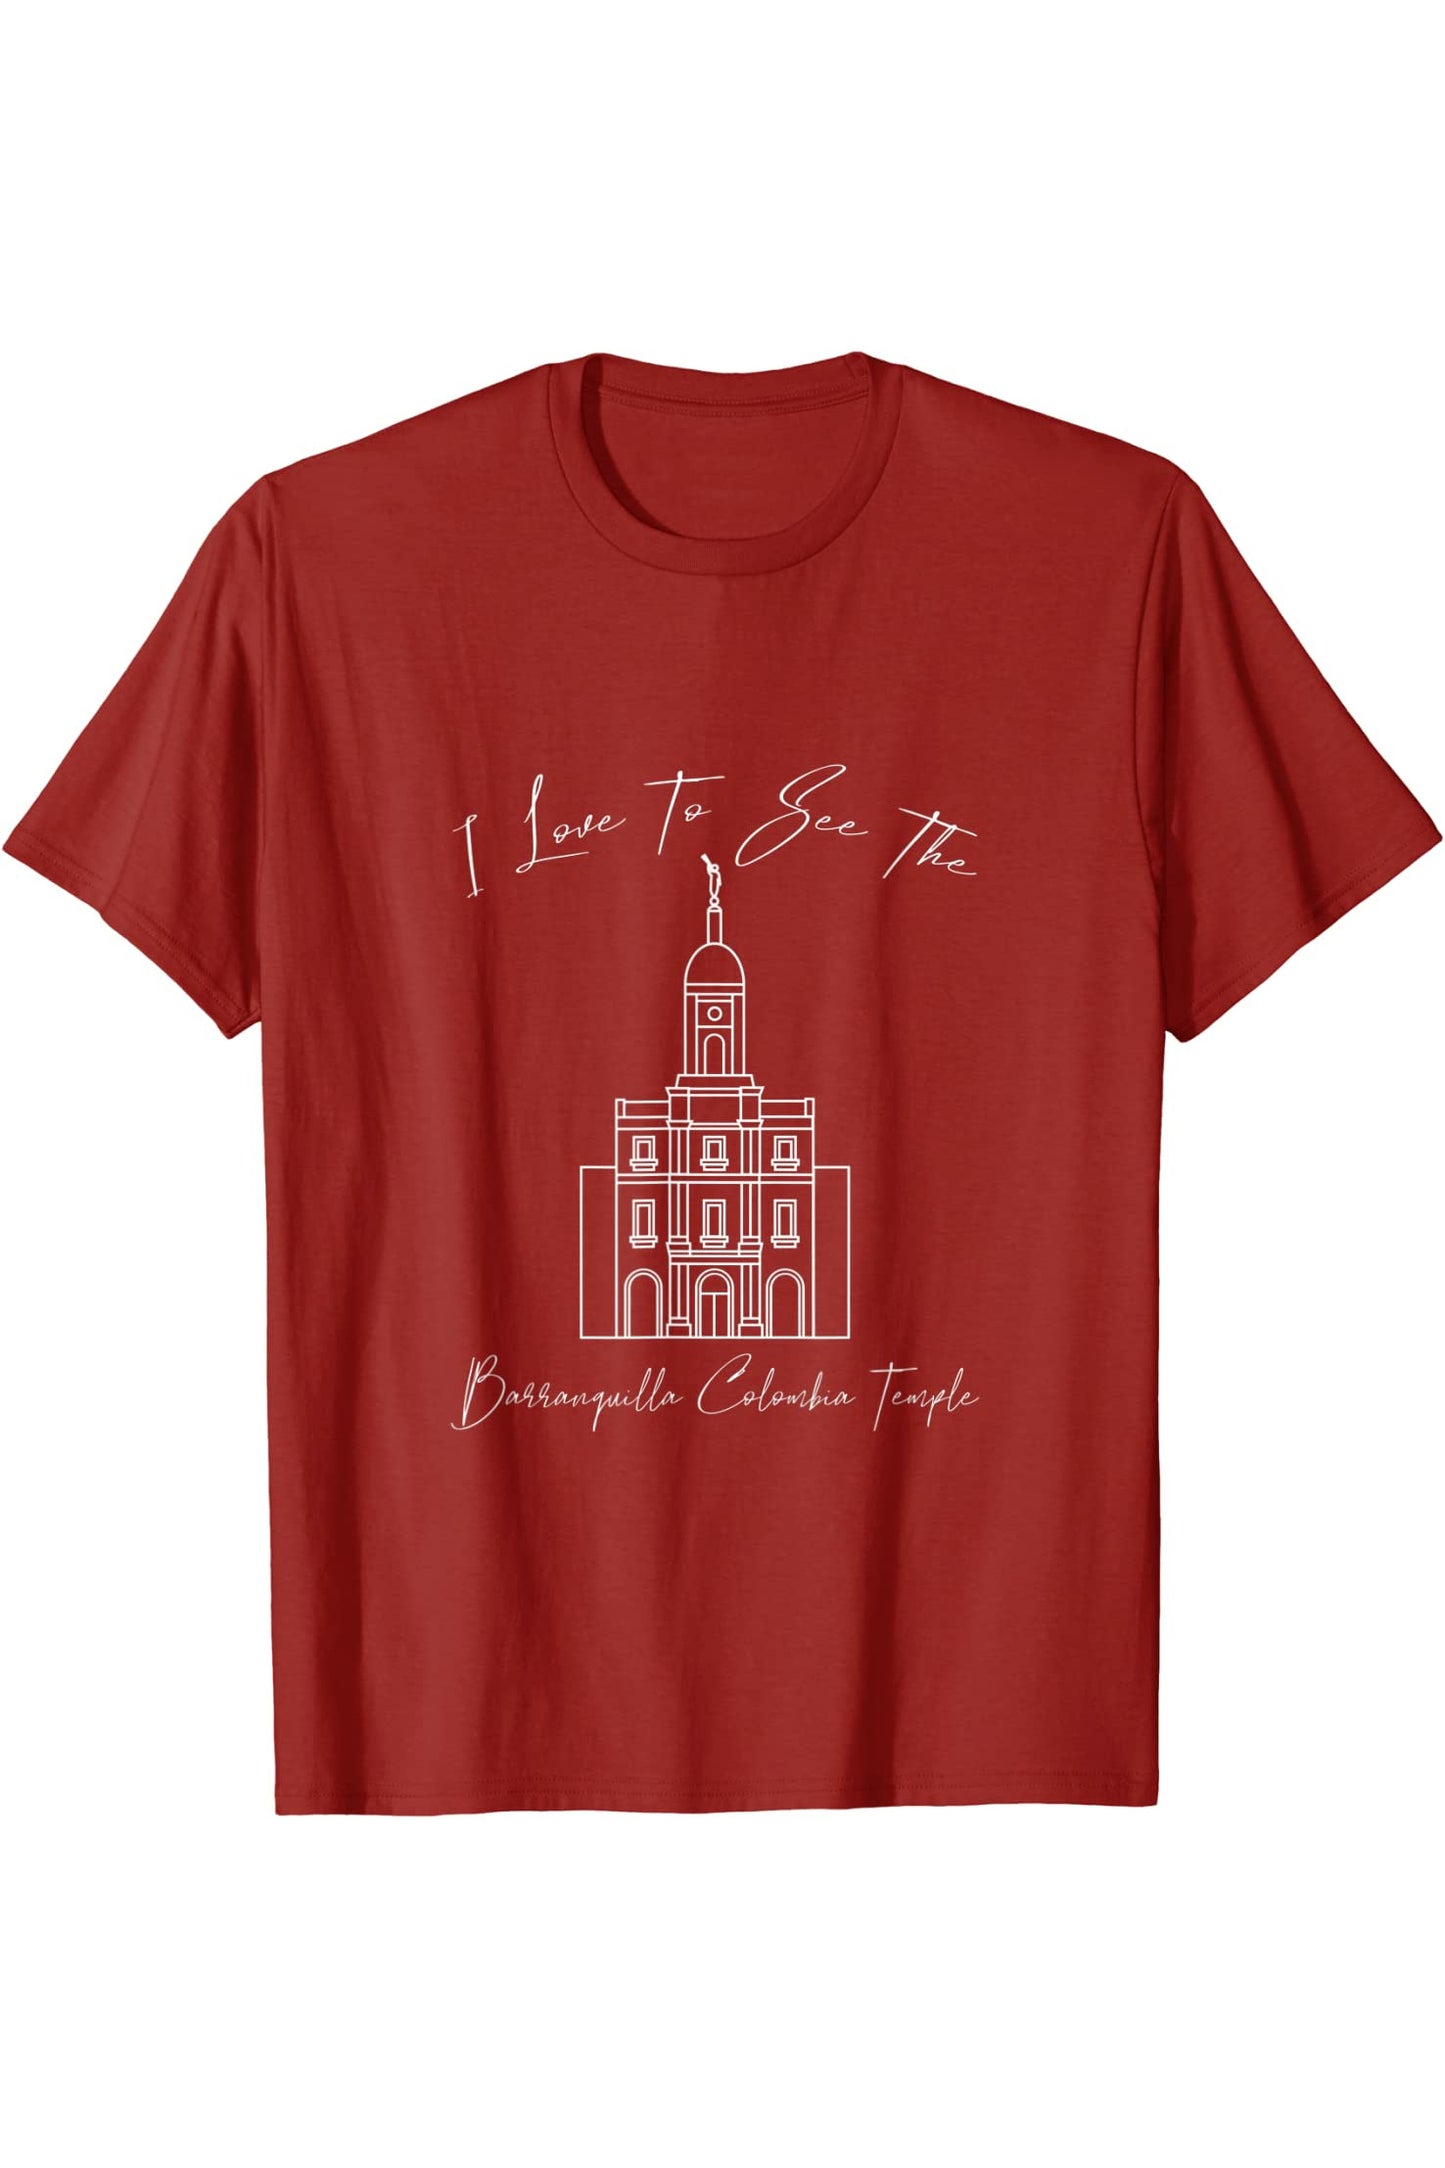 Barranquilla Colombia Temple T-Shirt - Calligraphy Style (English) US